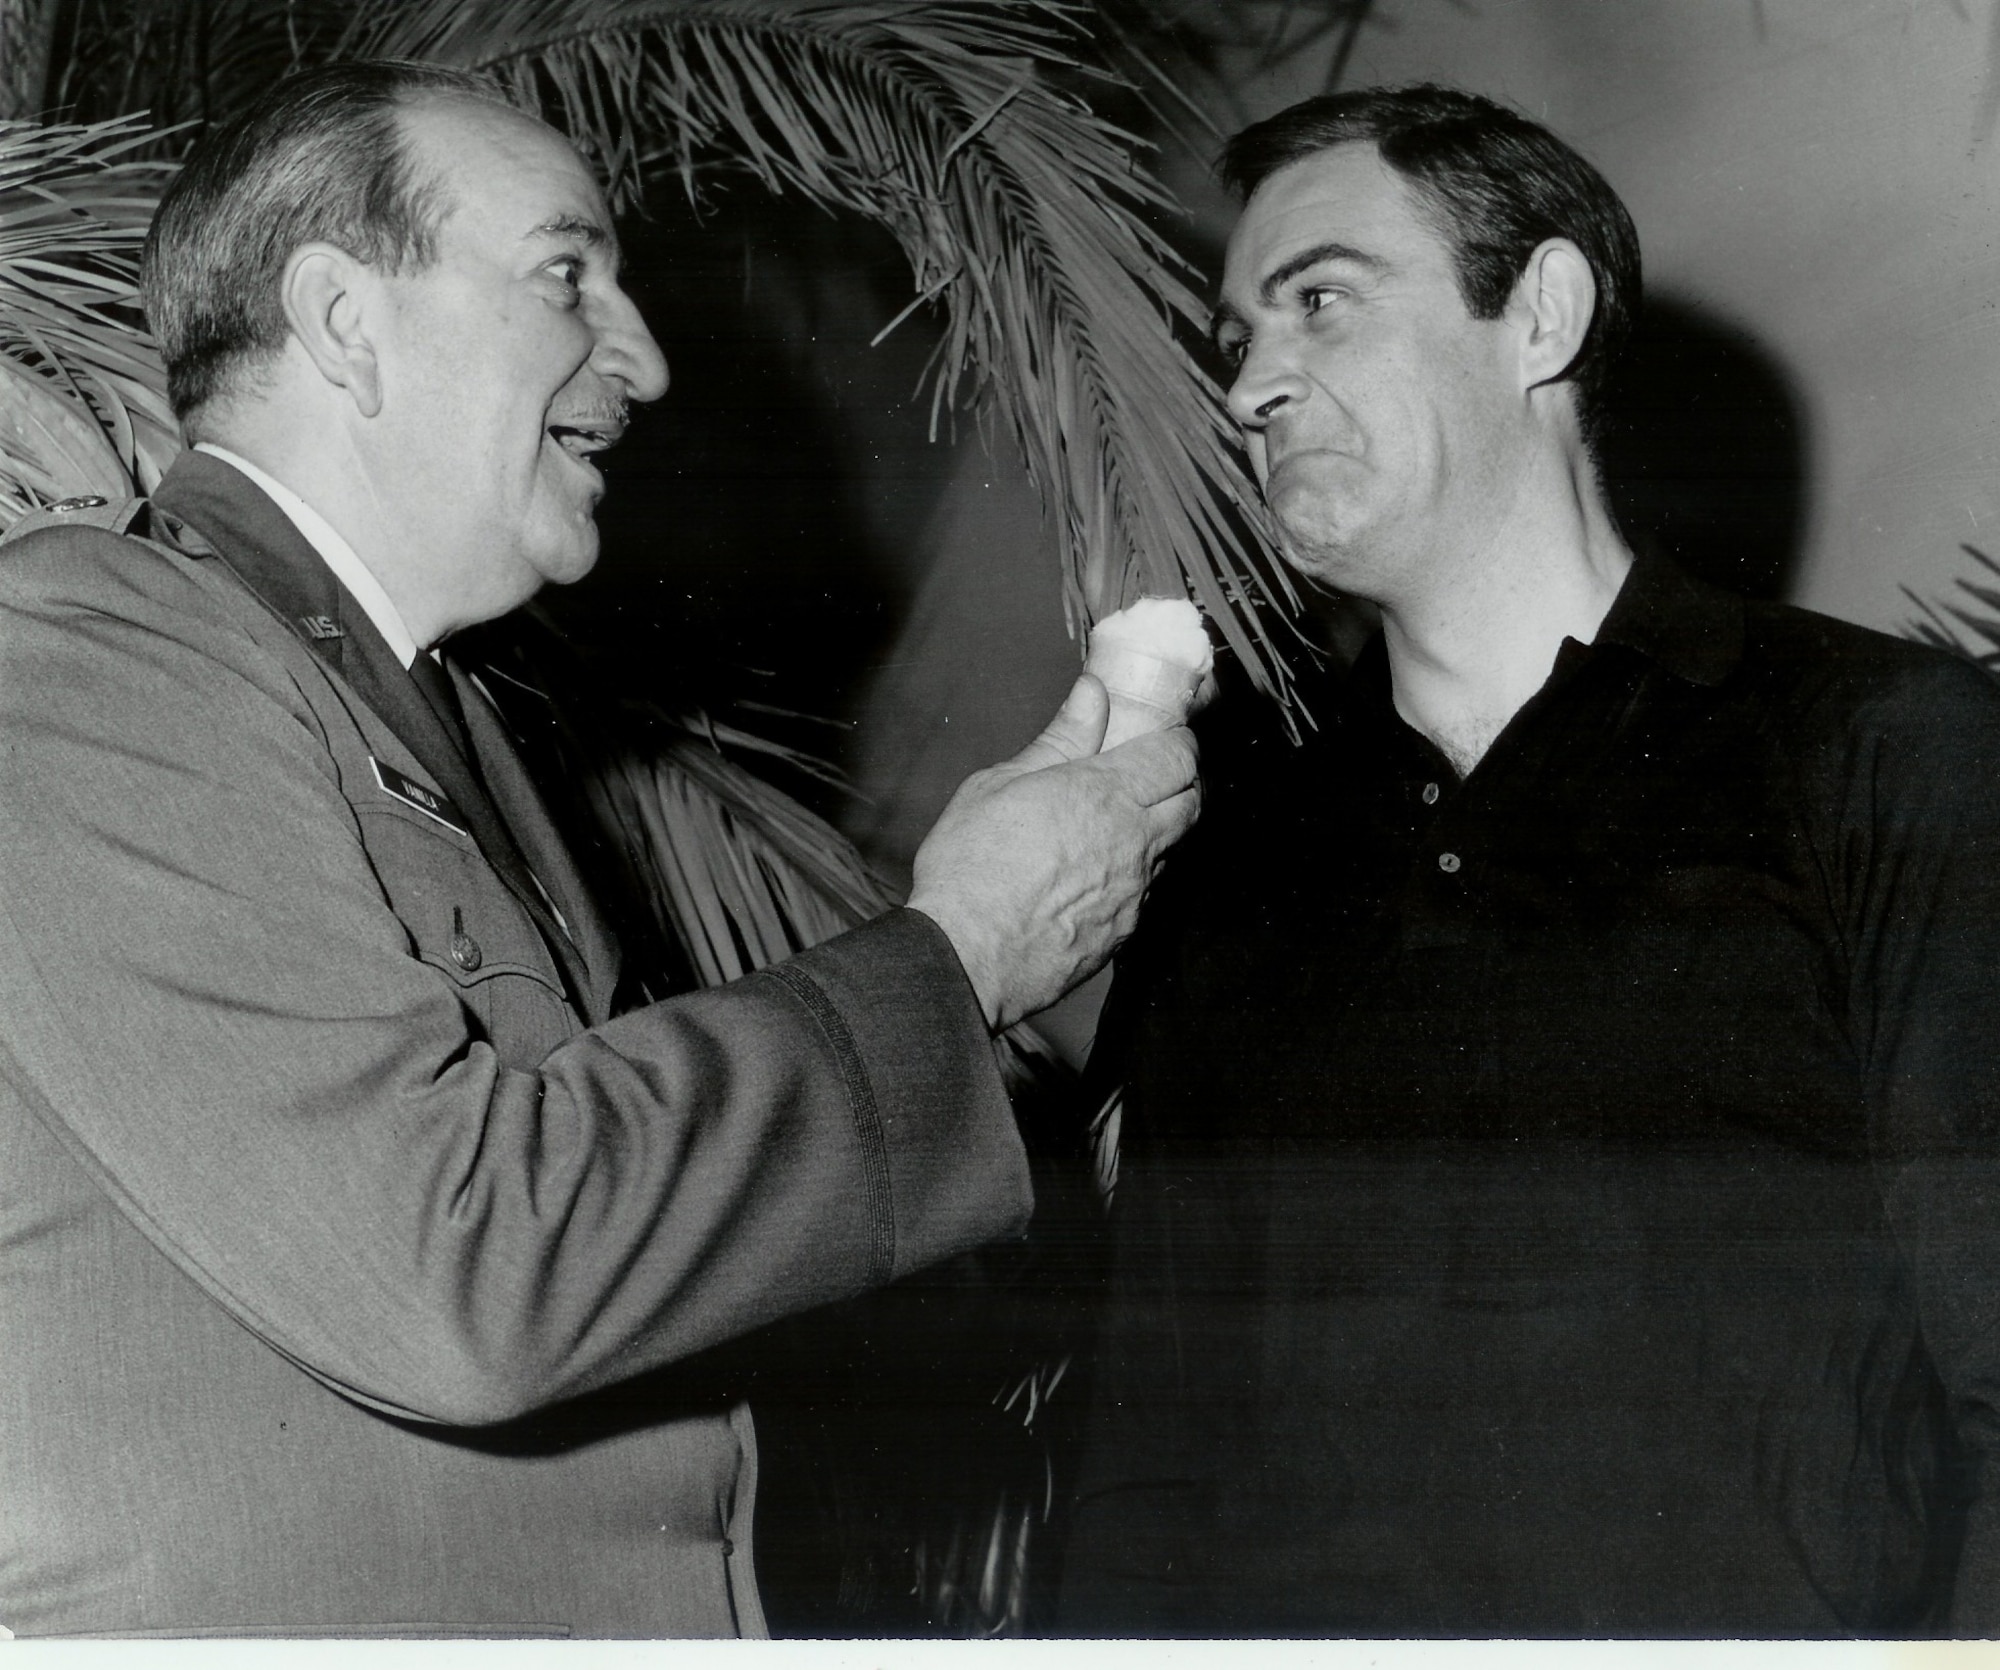 Retired Lieutenant Colonel Charles Russhon, military advisor to the James Bond films in the ‘60s and ‘70s, feigns shoving a vanilla ice cream cone in Sean Connery’s face during the production of “Thunderball.” Russhon and Connery became friends on set. The vanilla ice cream cone had special significance to Russhon, who inspired the “Charlie Vanilla” character, an ice cream loving mister fix-it, in friend and esteemed American cartoonist Milton Caniff’s comic strip “Steve Canyon.” (Photo courtesy of Christian Russhon)